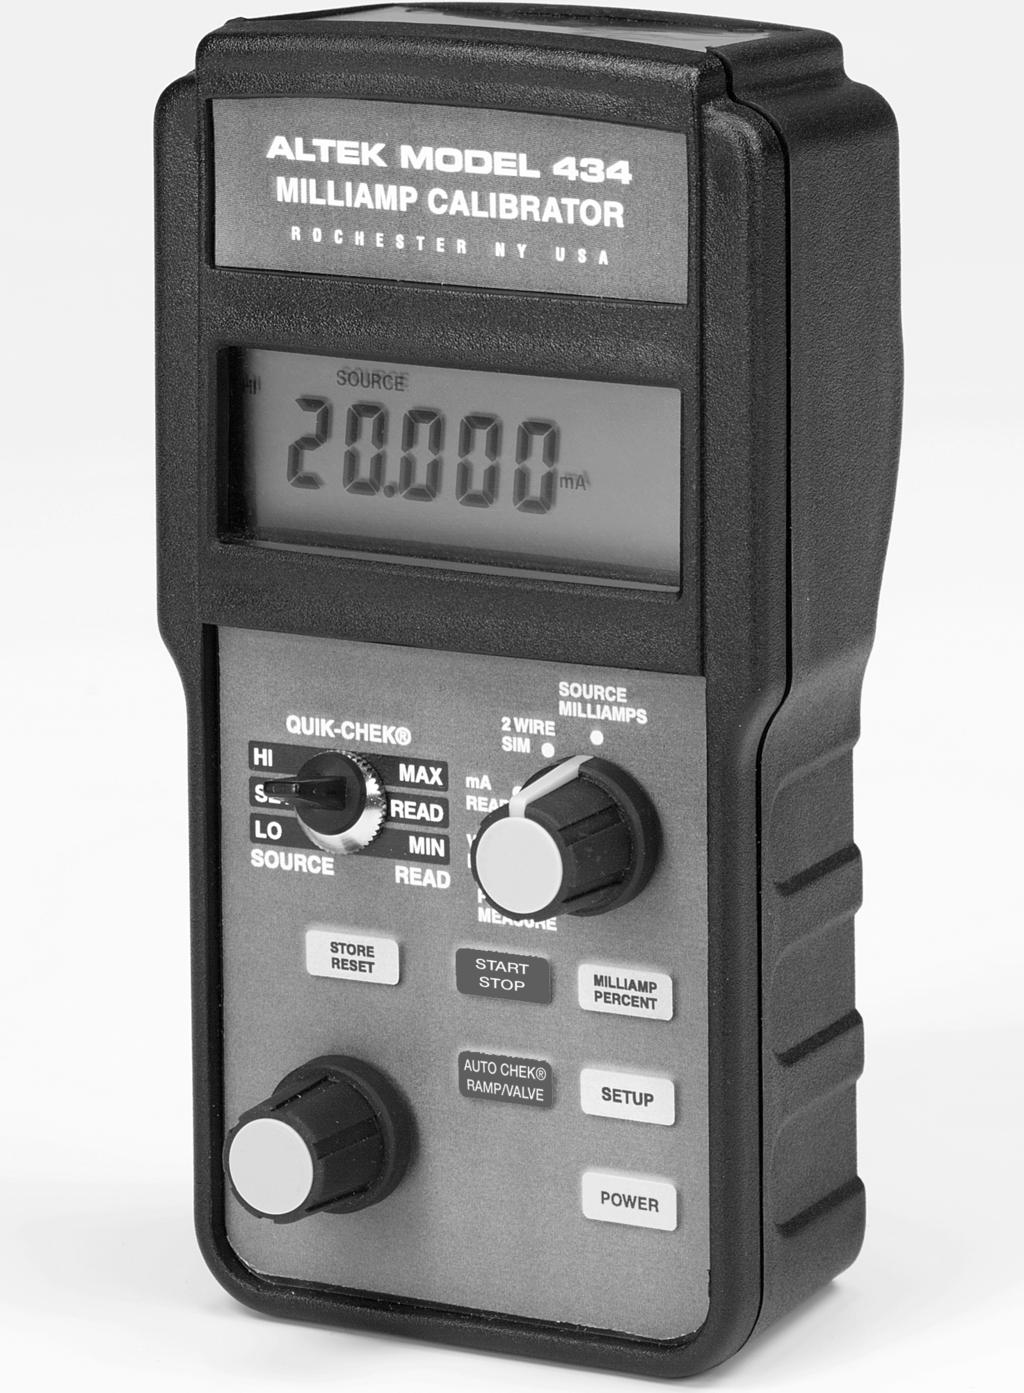 Milliamp Calibrator Model 434 General description Calibrate Loop Instruments Calibrate and troubleshoot all the signals in a standard 4 to 20 milliamp process control loop with Altek s Model 434